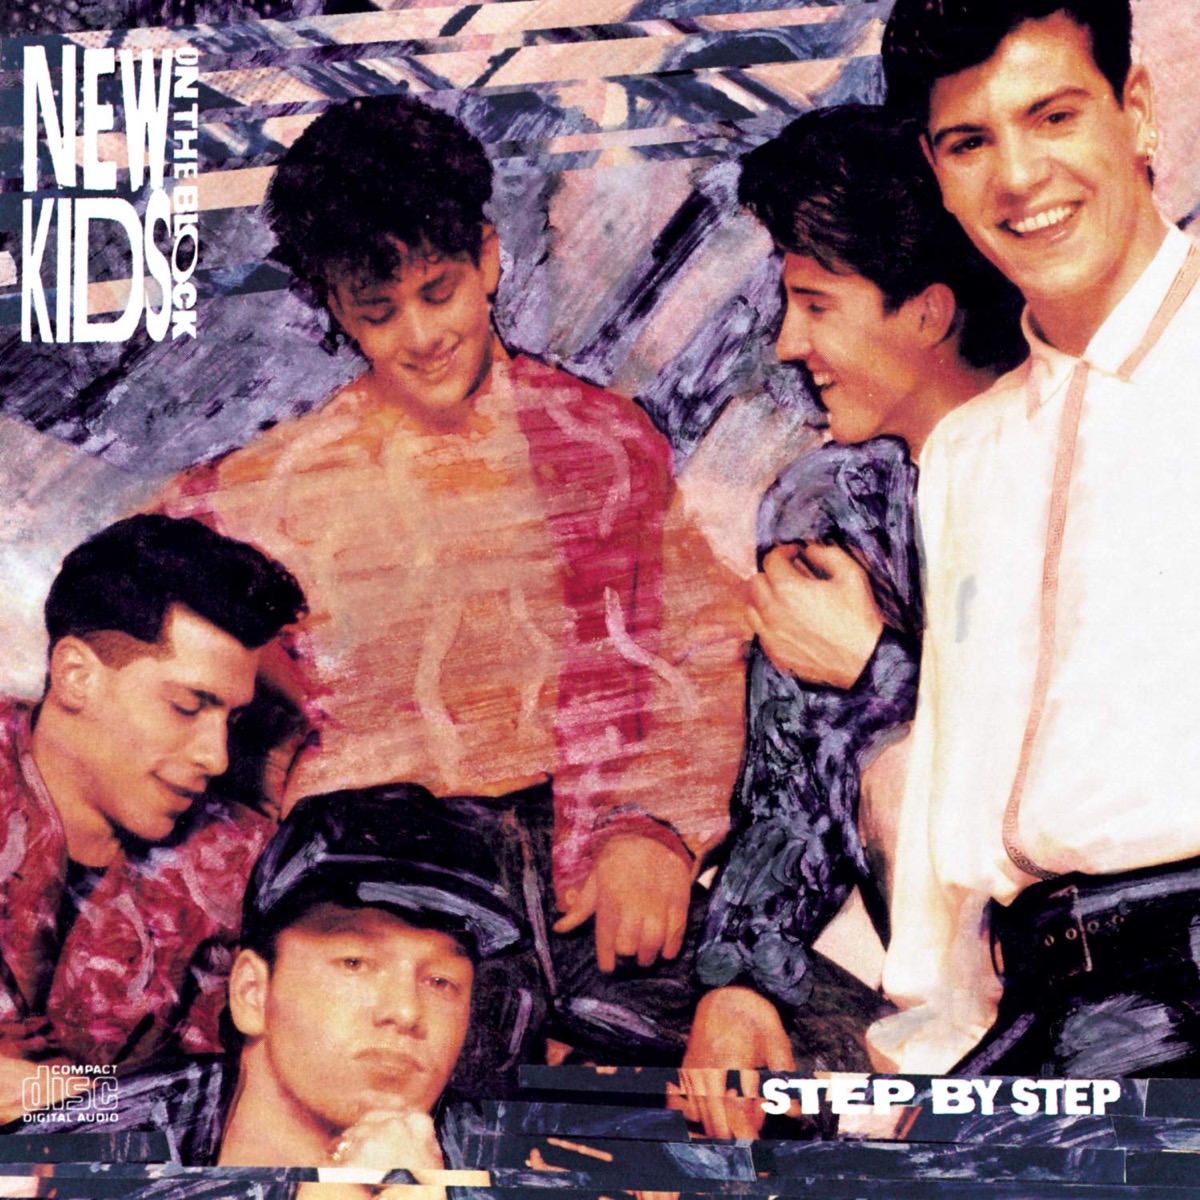 New Kids on the Block "Step by Step" single cover